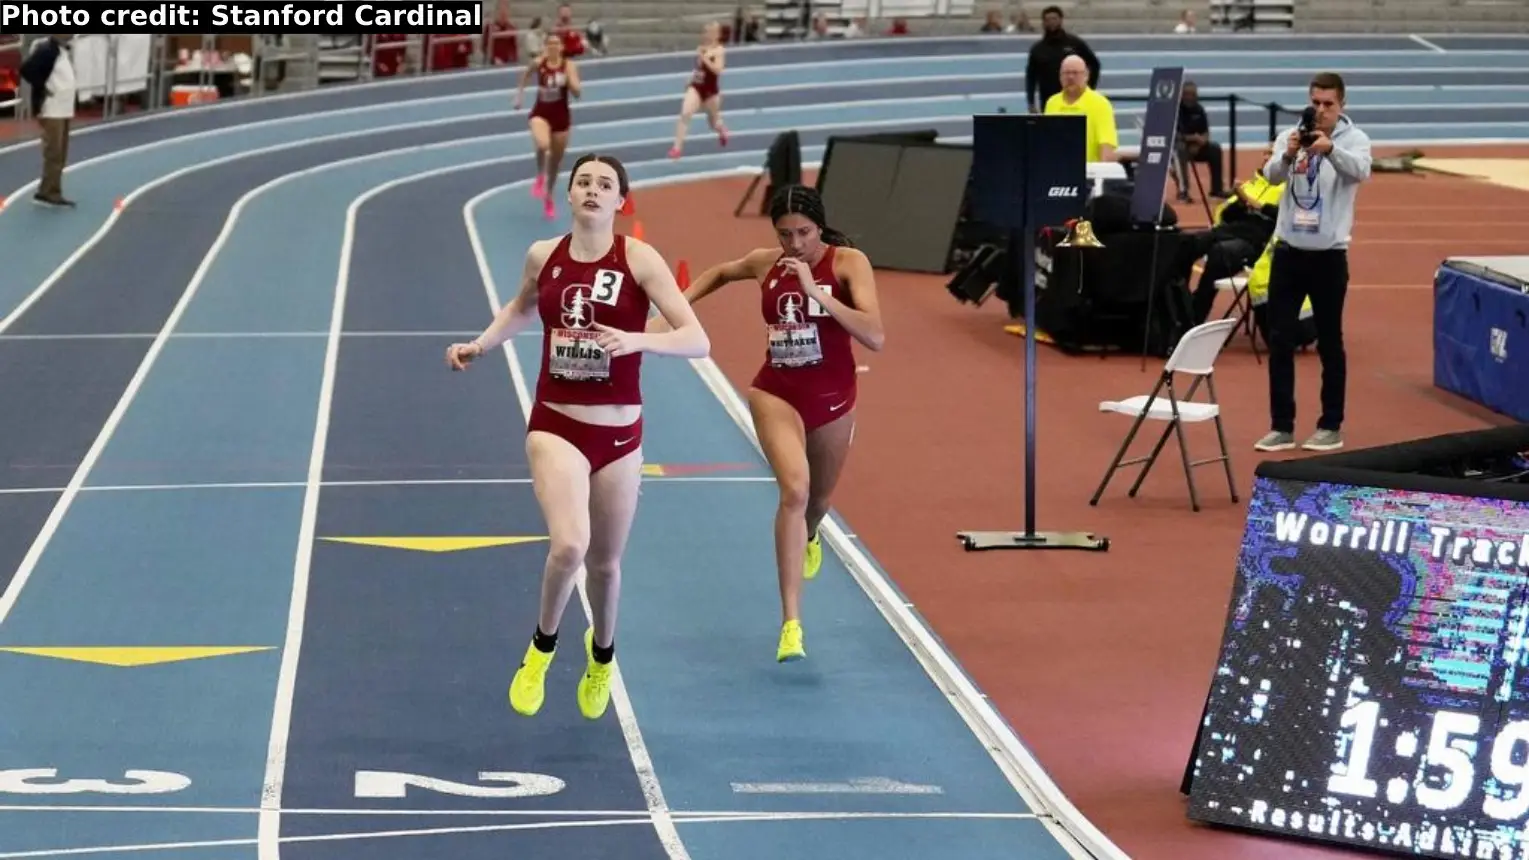 Stanford freshman Roisin Willis ahead of teammate and rookie Juliette Whittaker in the 800m